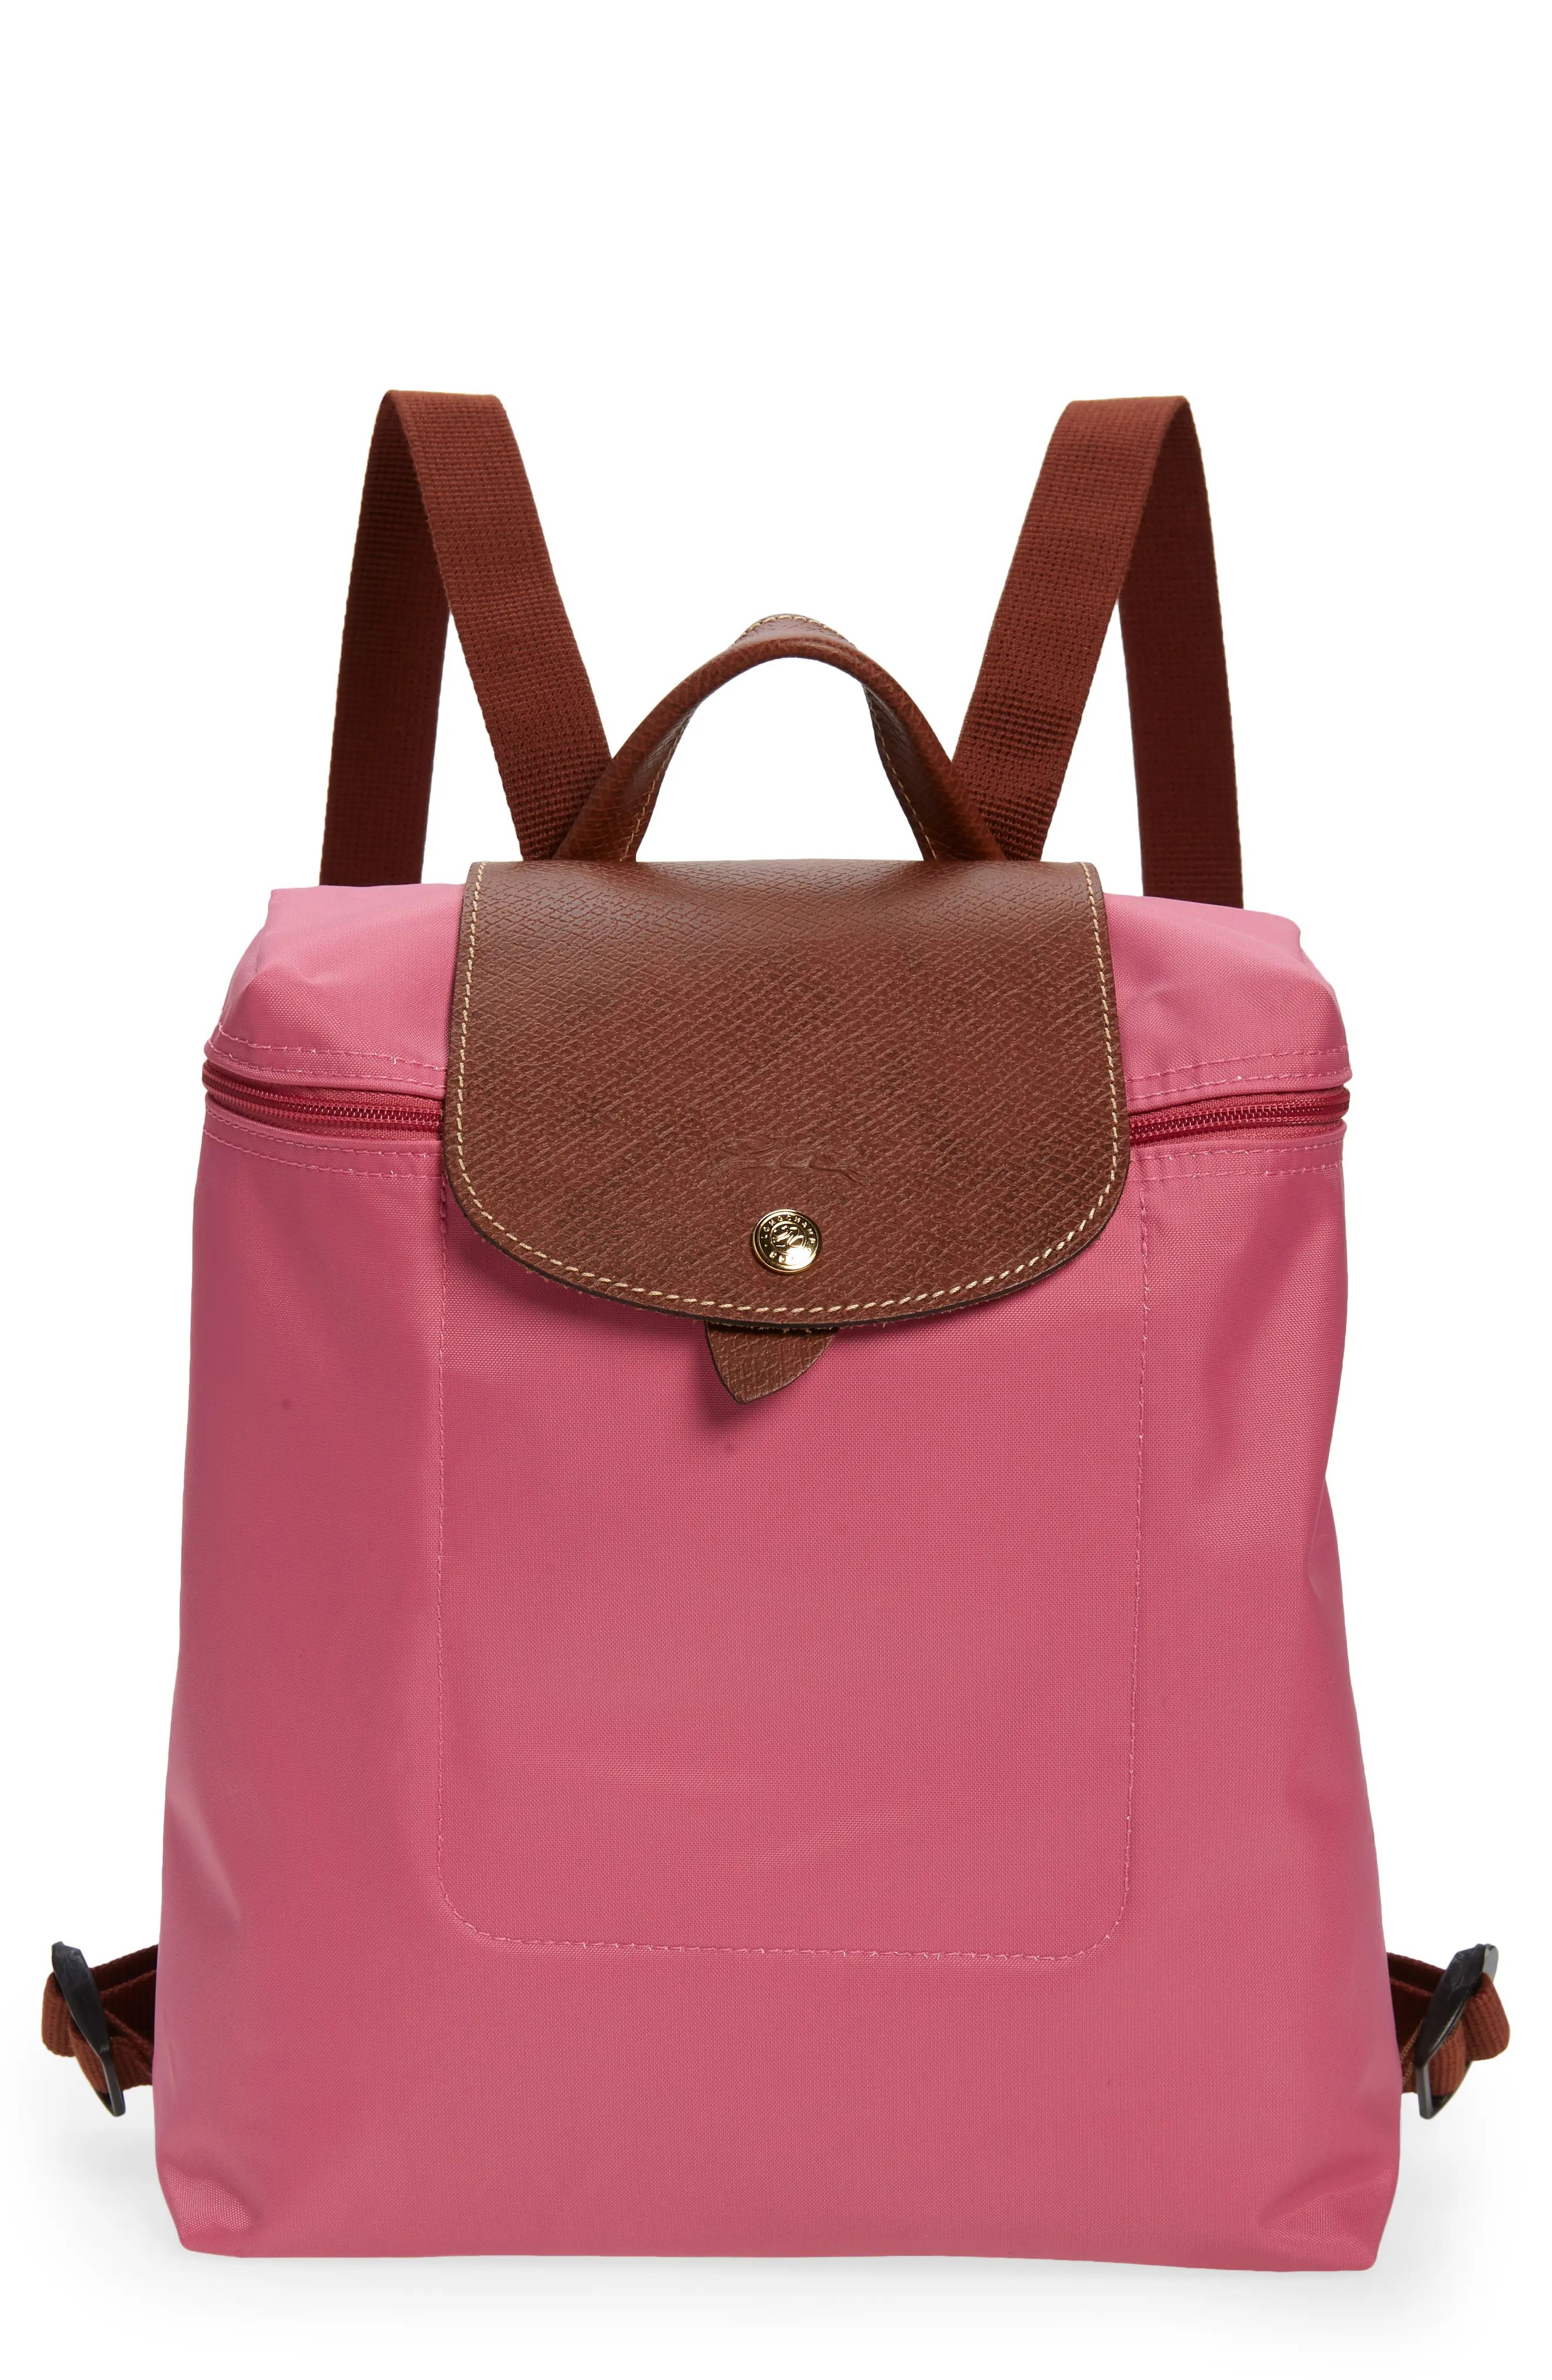 Longchamp Le Pliage Backpack in Peony at Nordstrom | Nordstrom